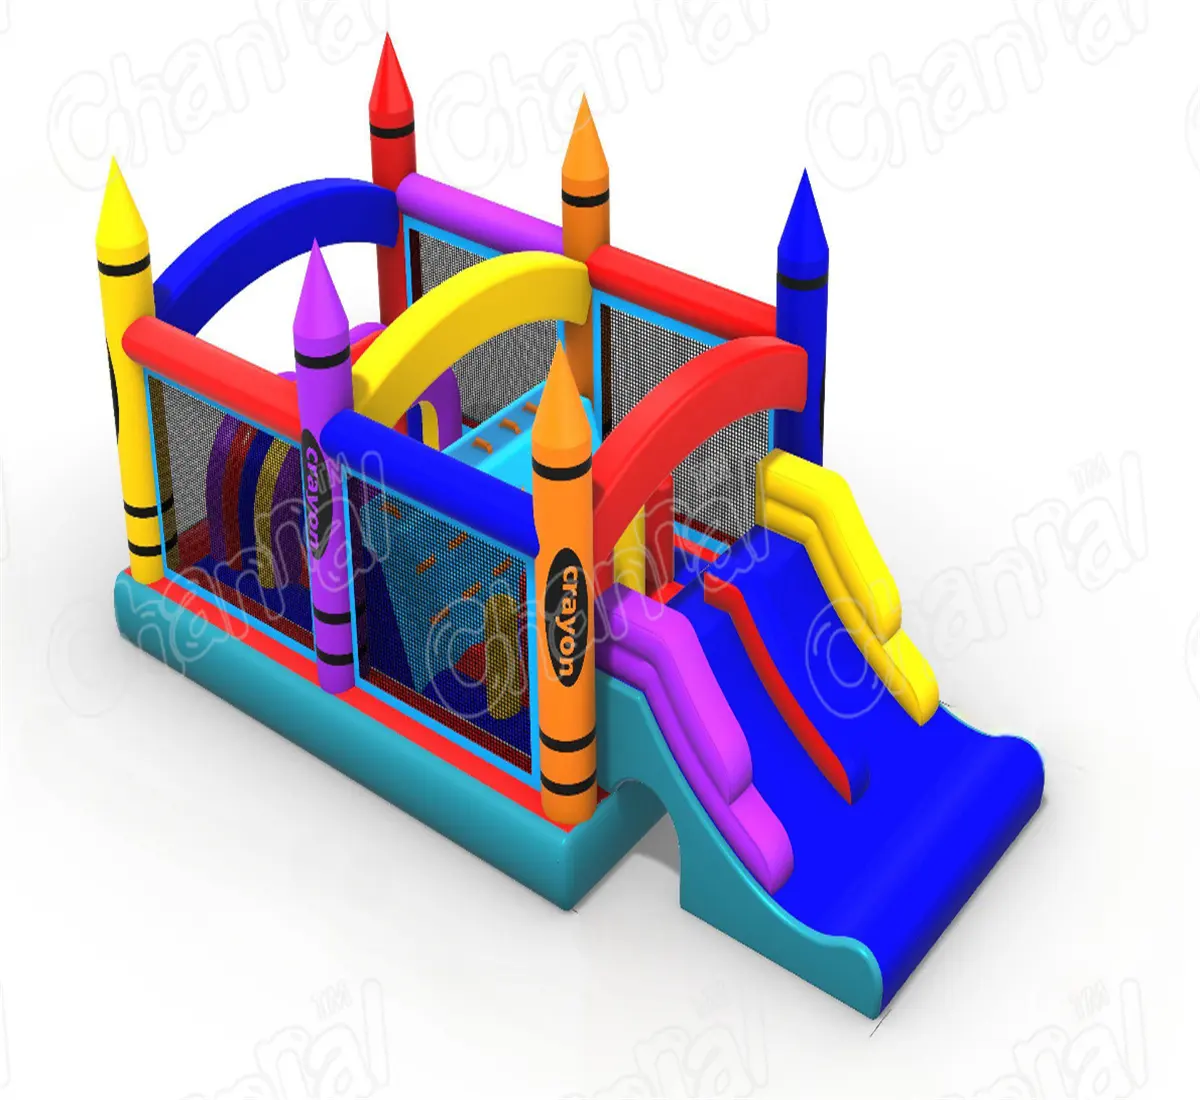 Outdoor Commercial Jumper Crayon Bouncing Castle With Slide For Kids Moonwalk Favorite Inflatable Obstacle